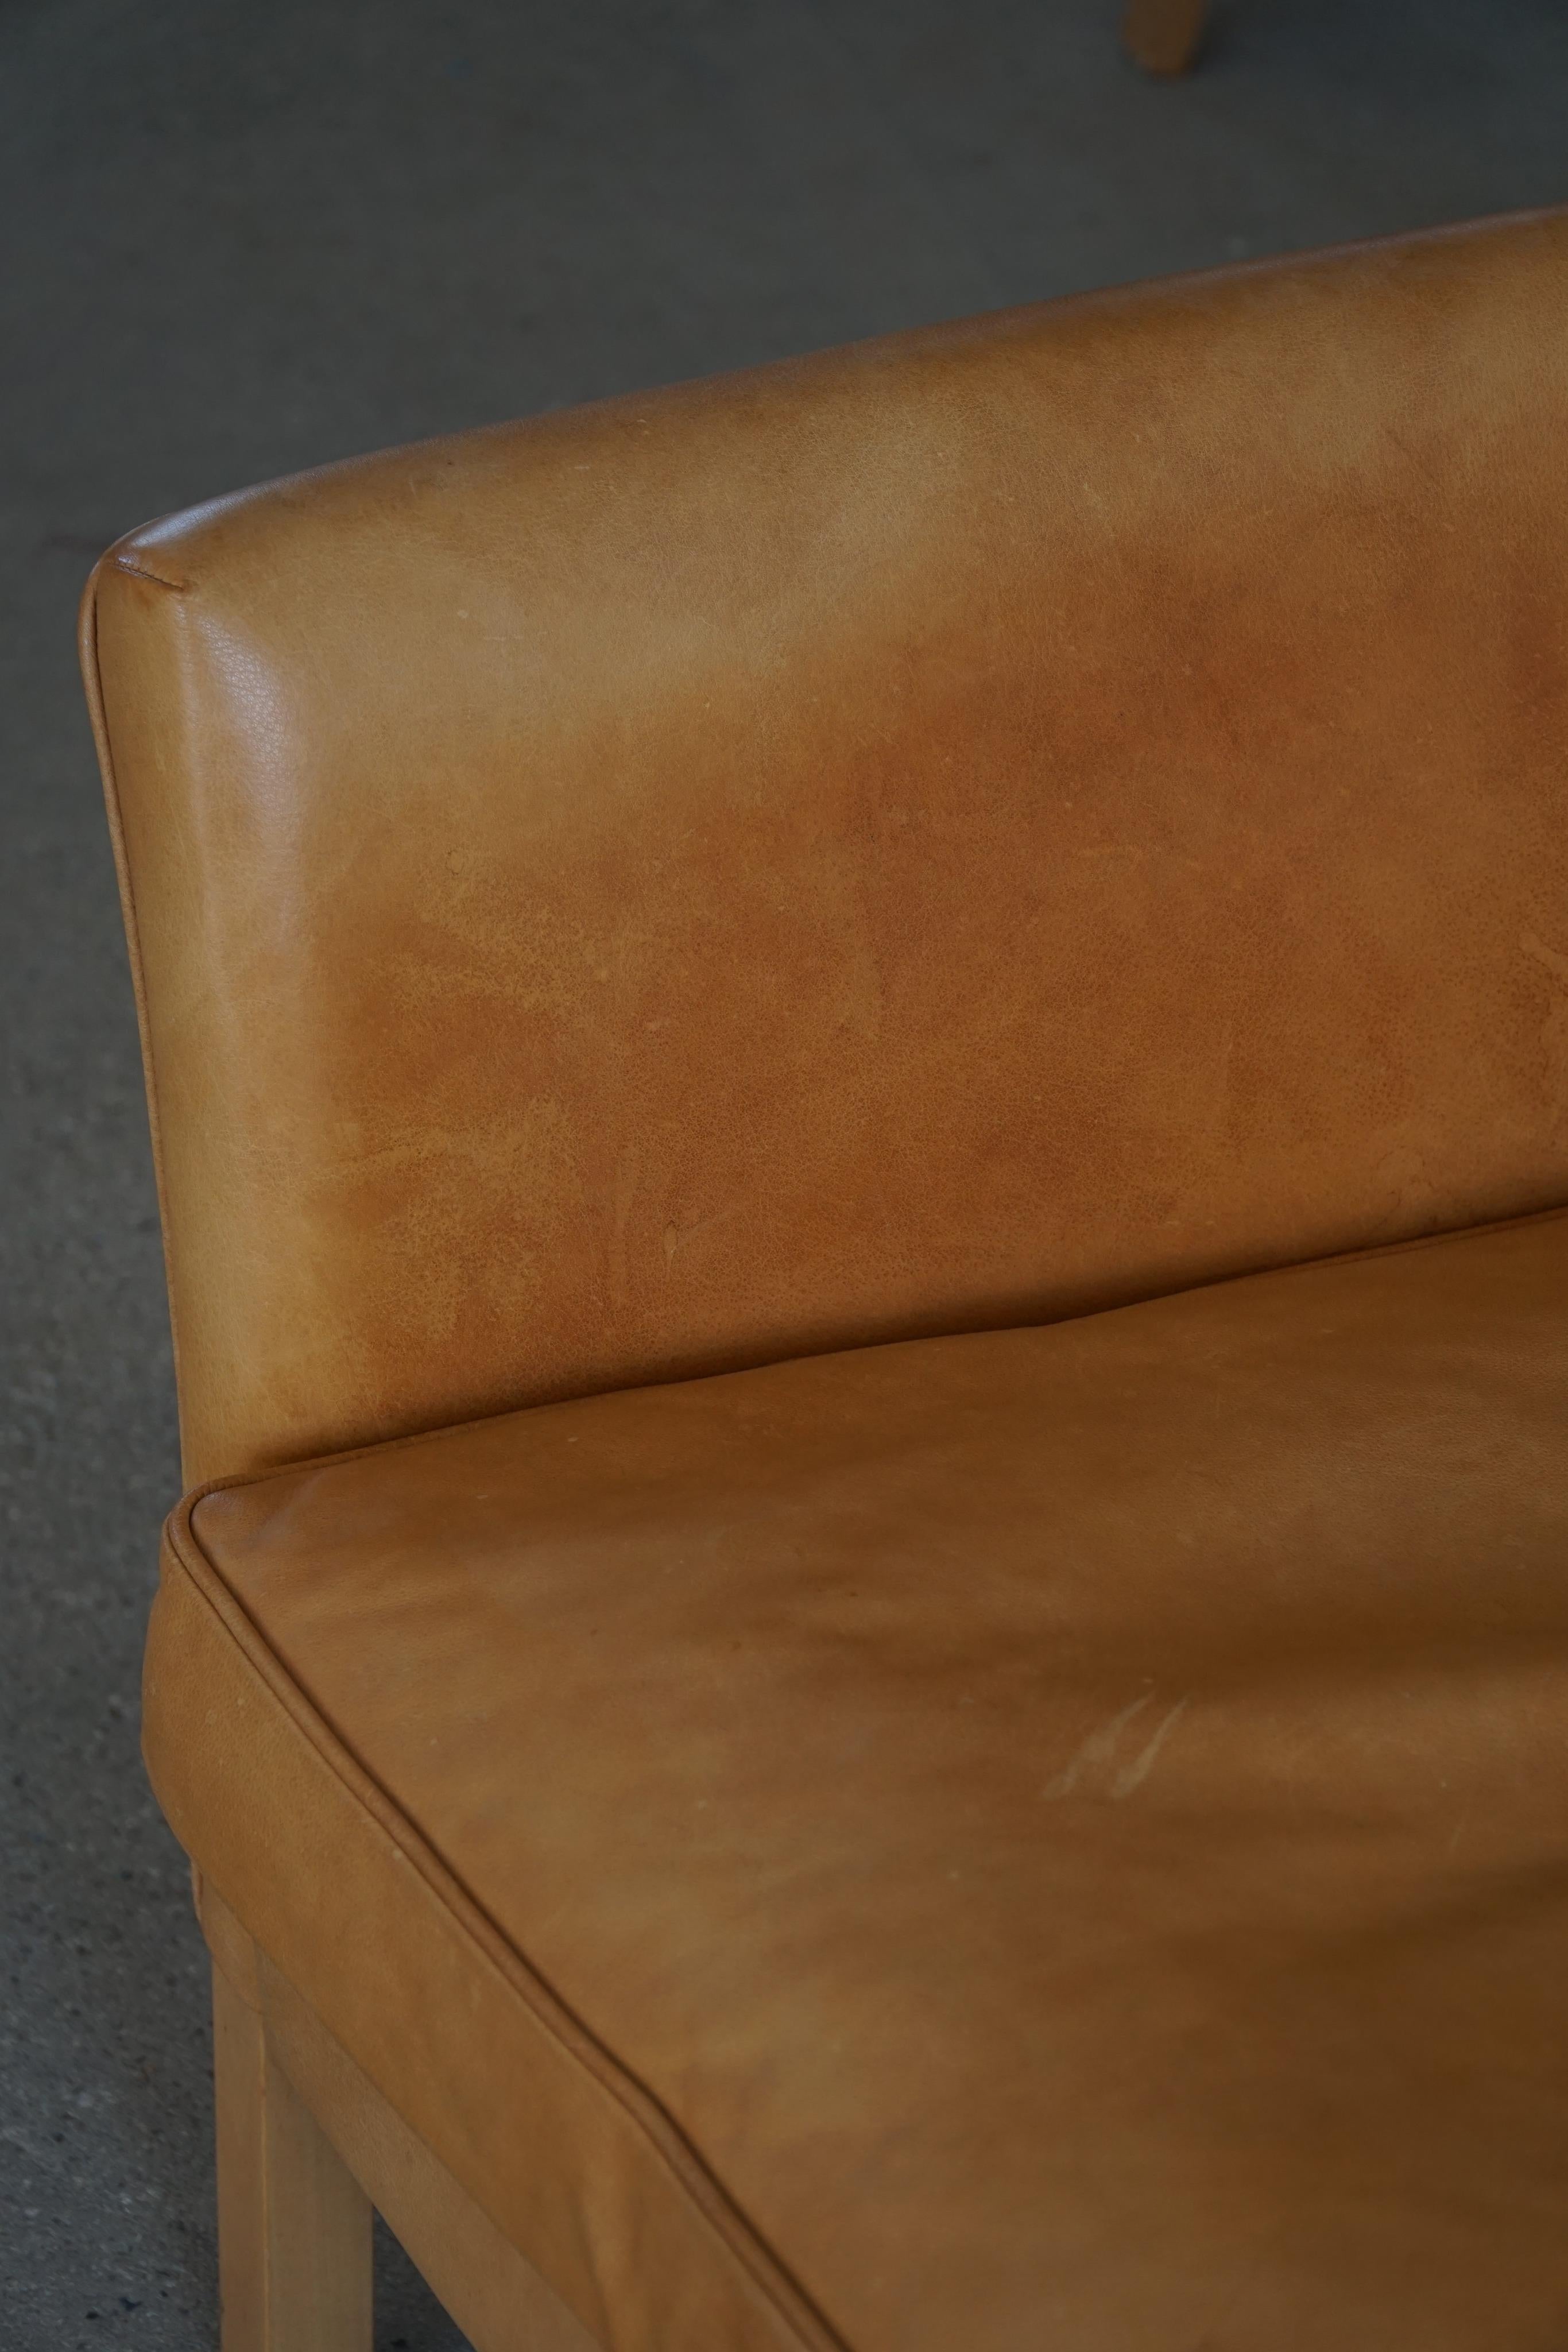 Danish Midcentury Stouby 3-Seater Sofa in Cognac Brown Leather, Made in 1970s For Sale 9